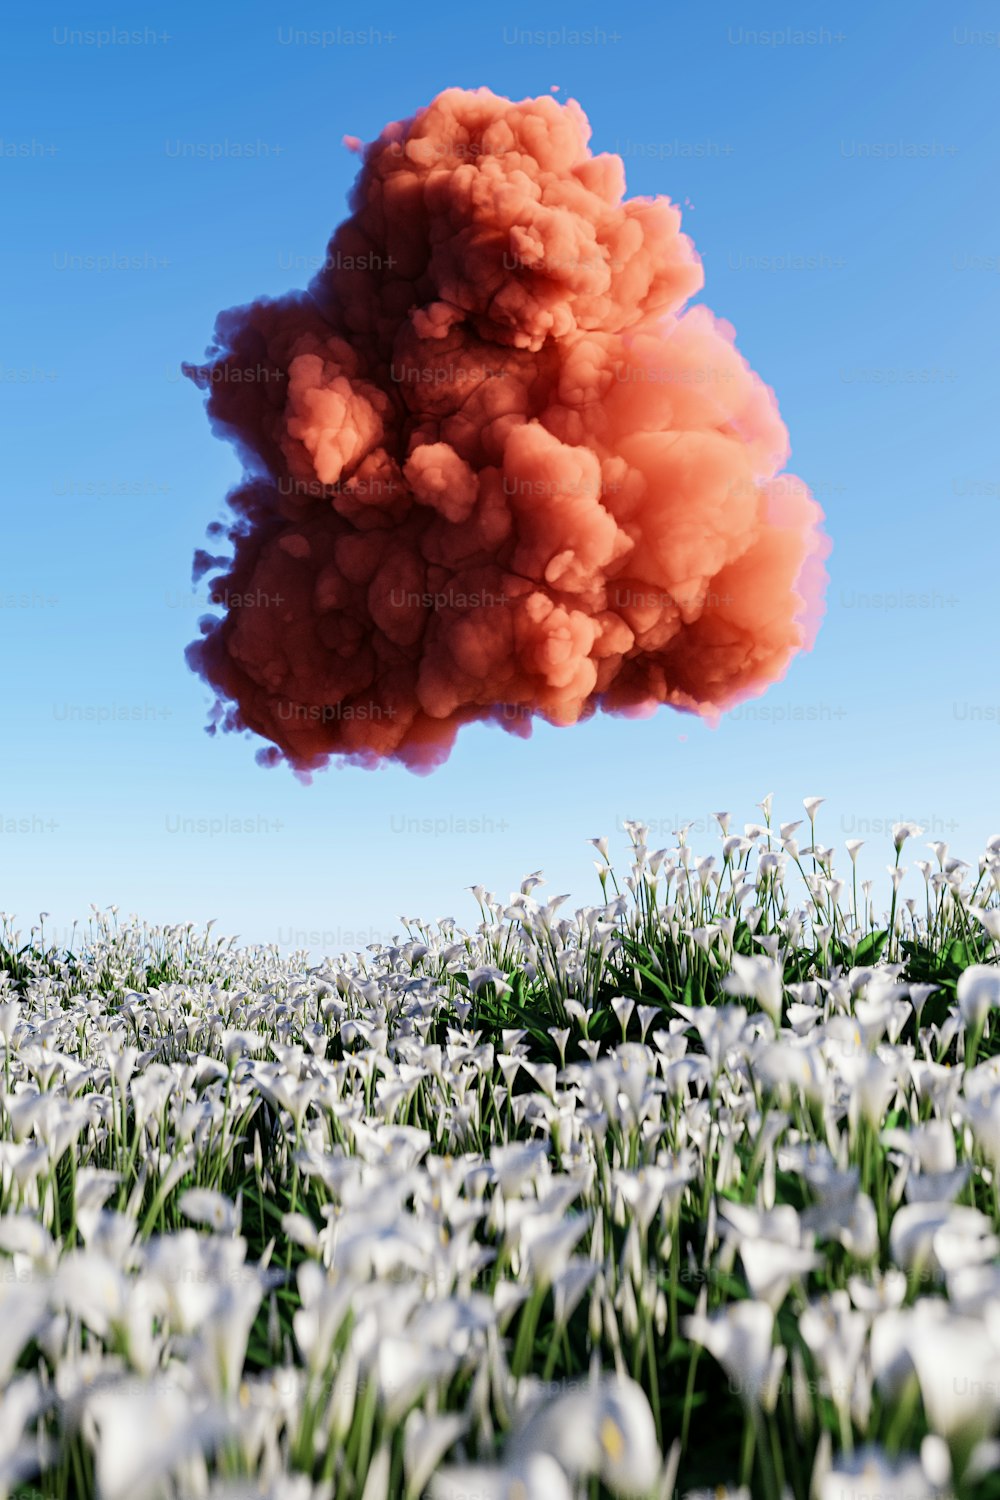 a cloud of smoke is in the air over a field of flowers